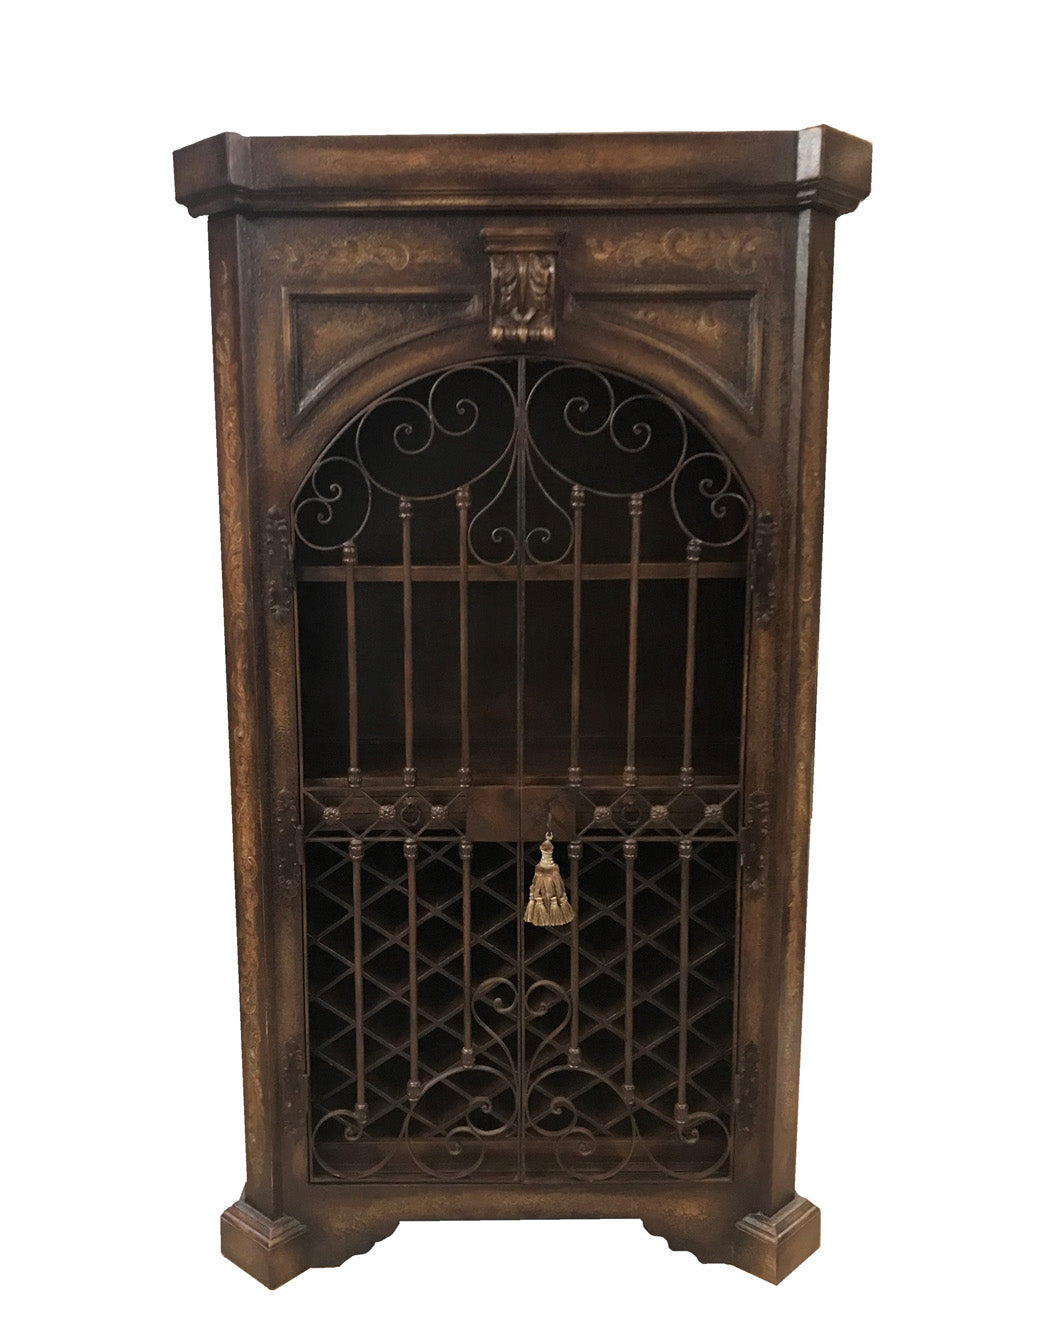 Ica Peruvian Hand Crafted Wood and Iron Wine Cabinet